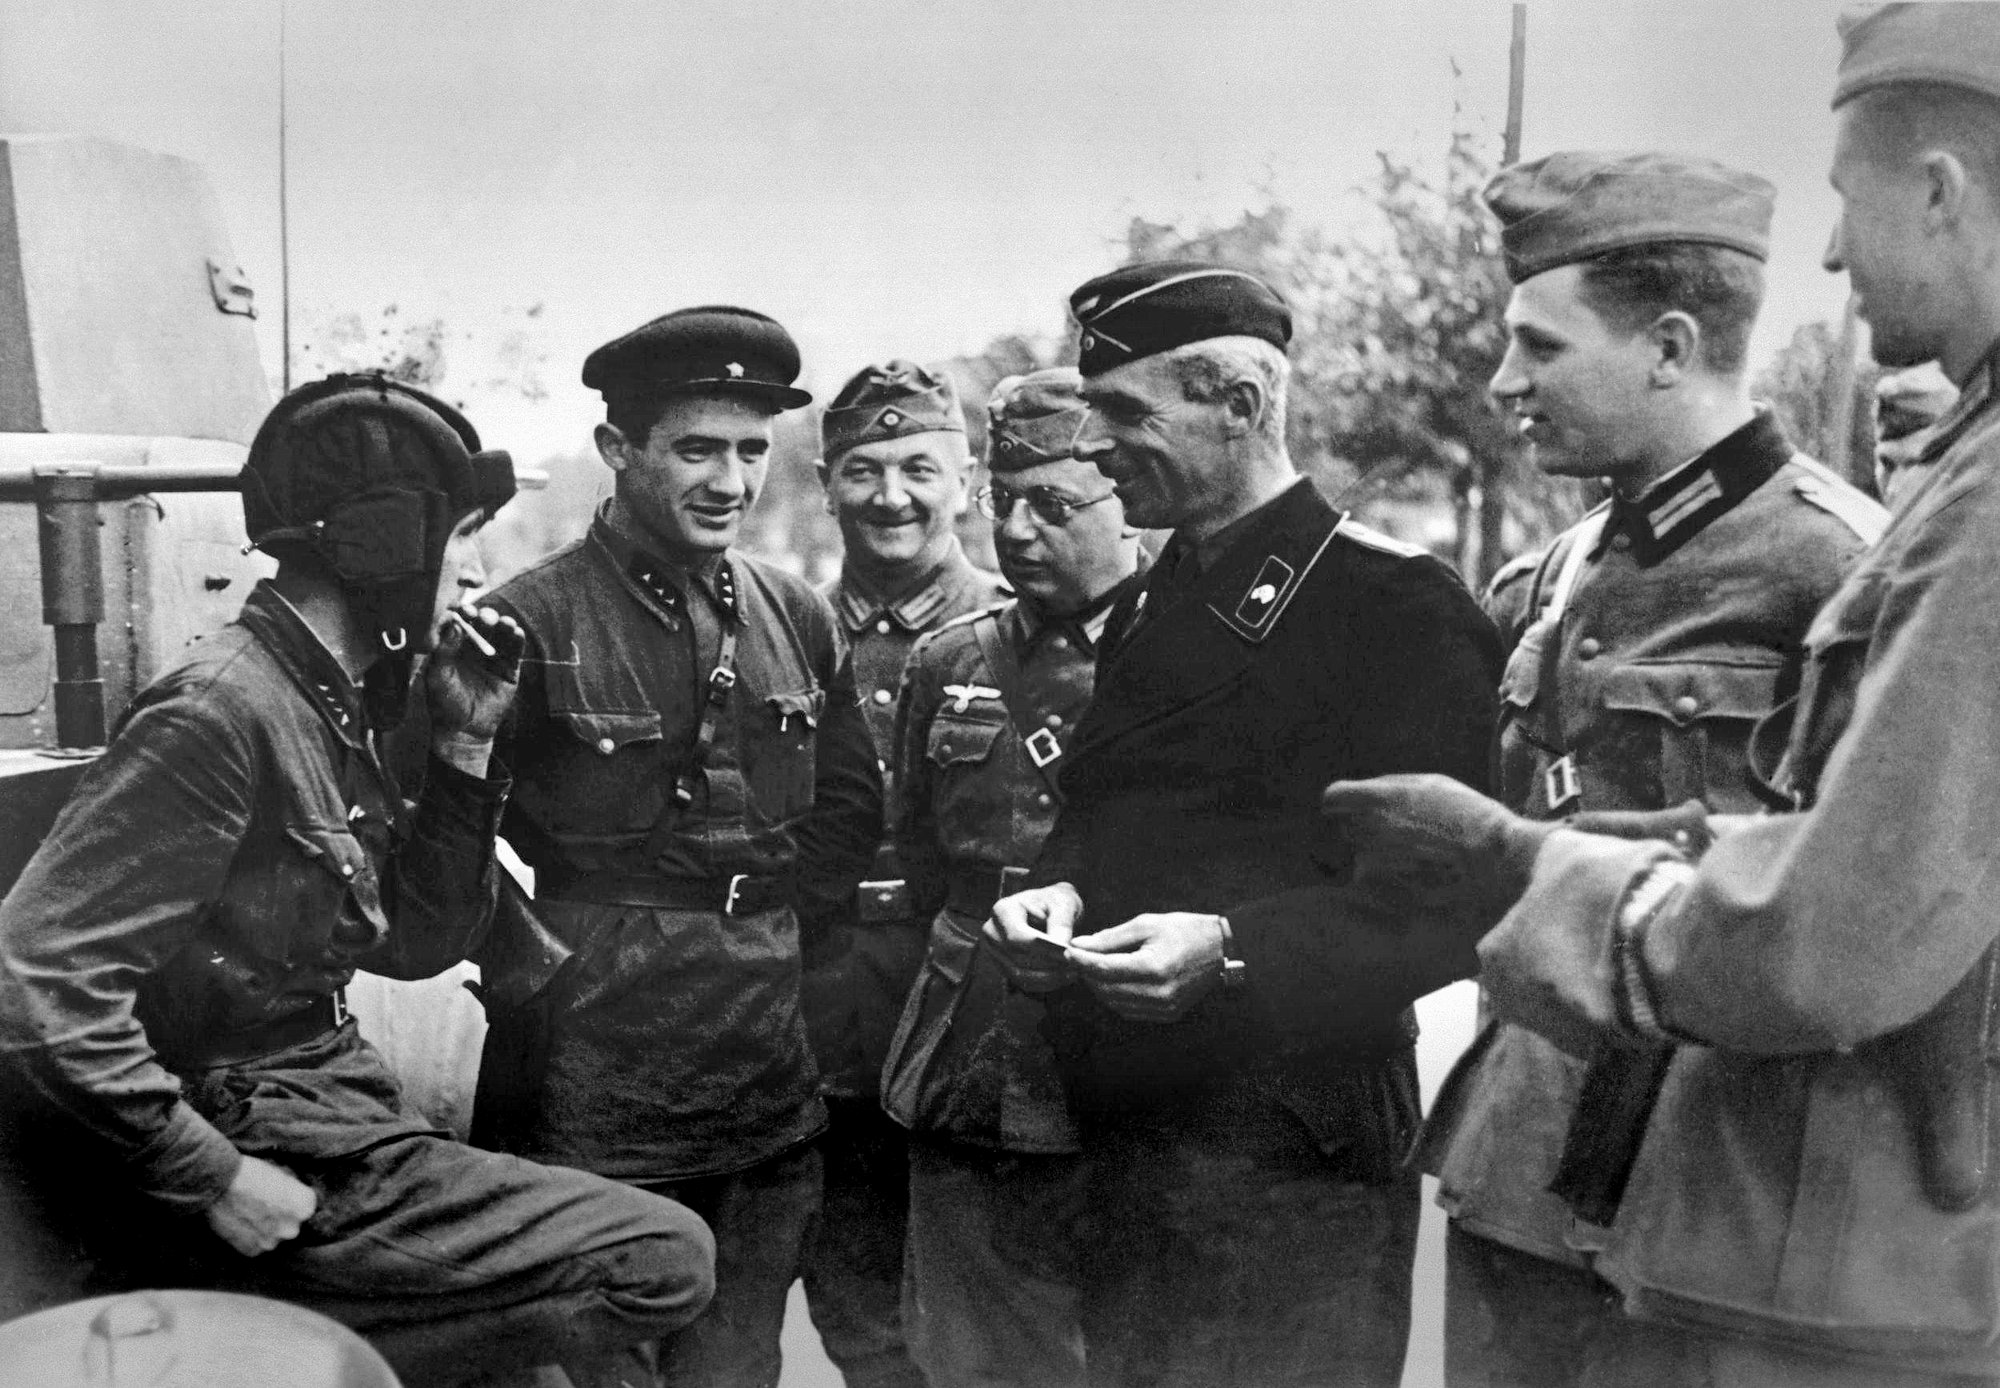 Soviet-and-German-troops-in-a-friendly-discussion-after-suppressing-Polish-resistance-in-Brest-Sept.-18-1939.jpg